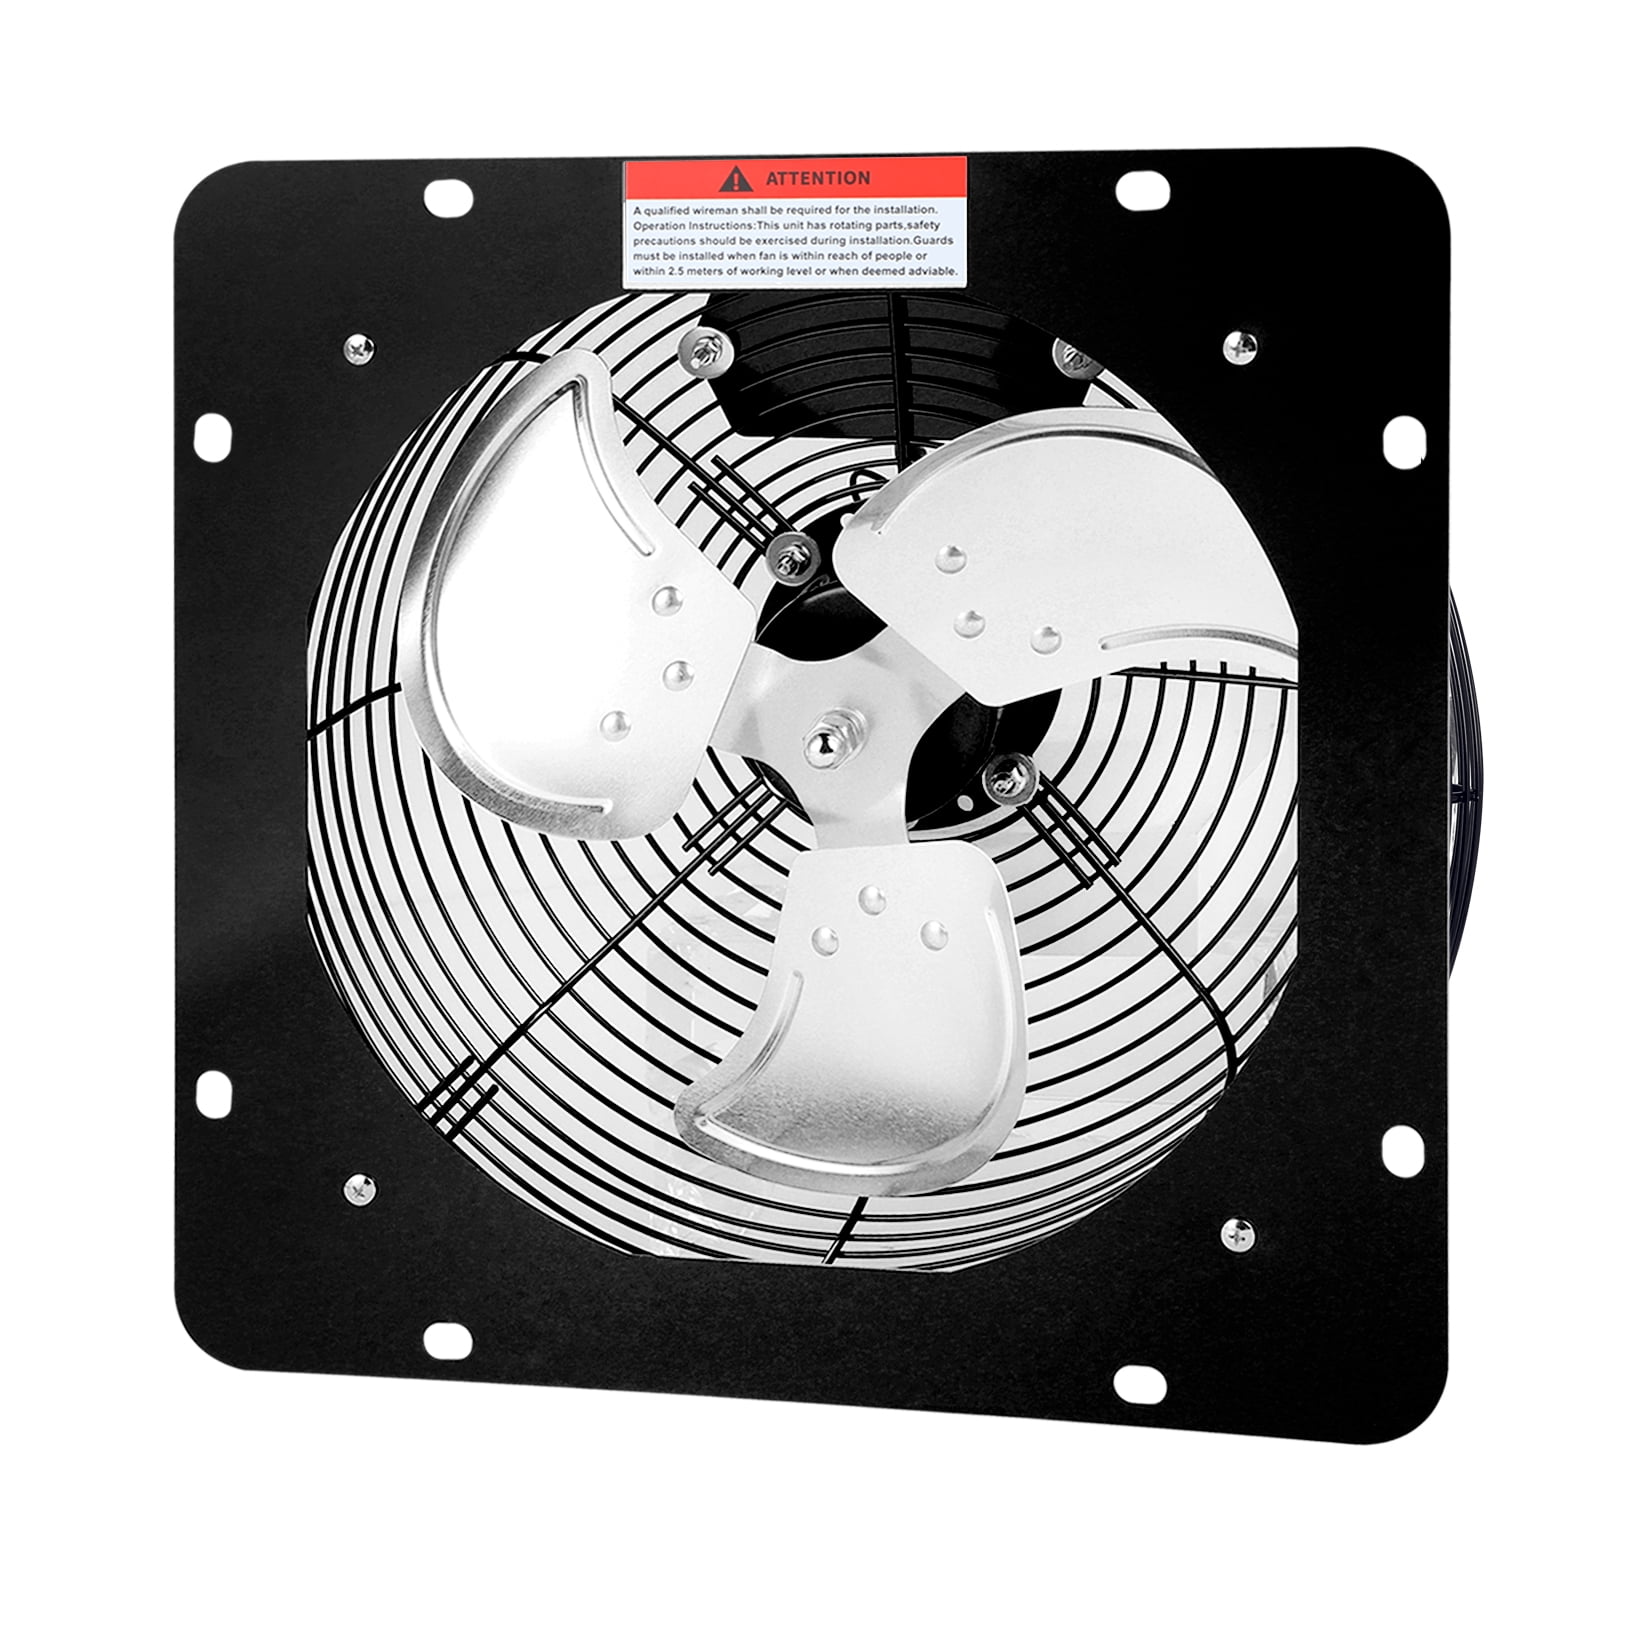 V6 - Complete 8 inch Ventilation kit with Cloudline AC Infinity fan - T8  with auto temp/humidity controller. - PA Hydroponics